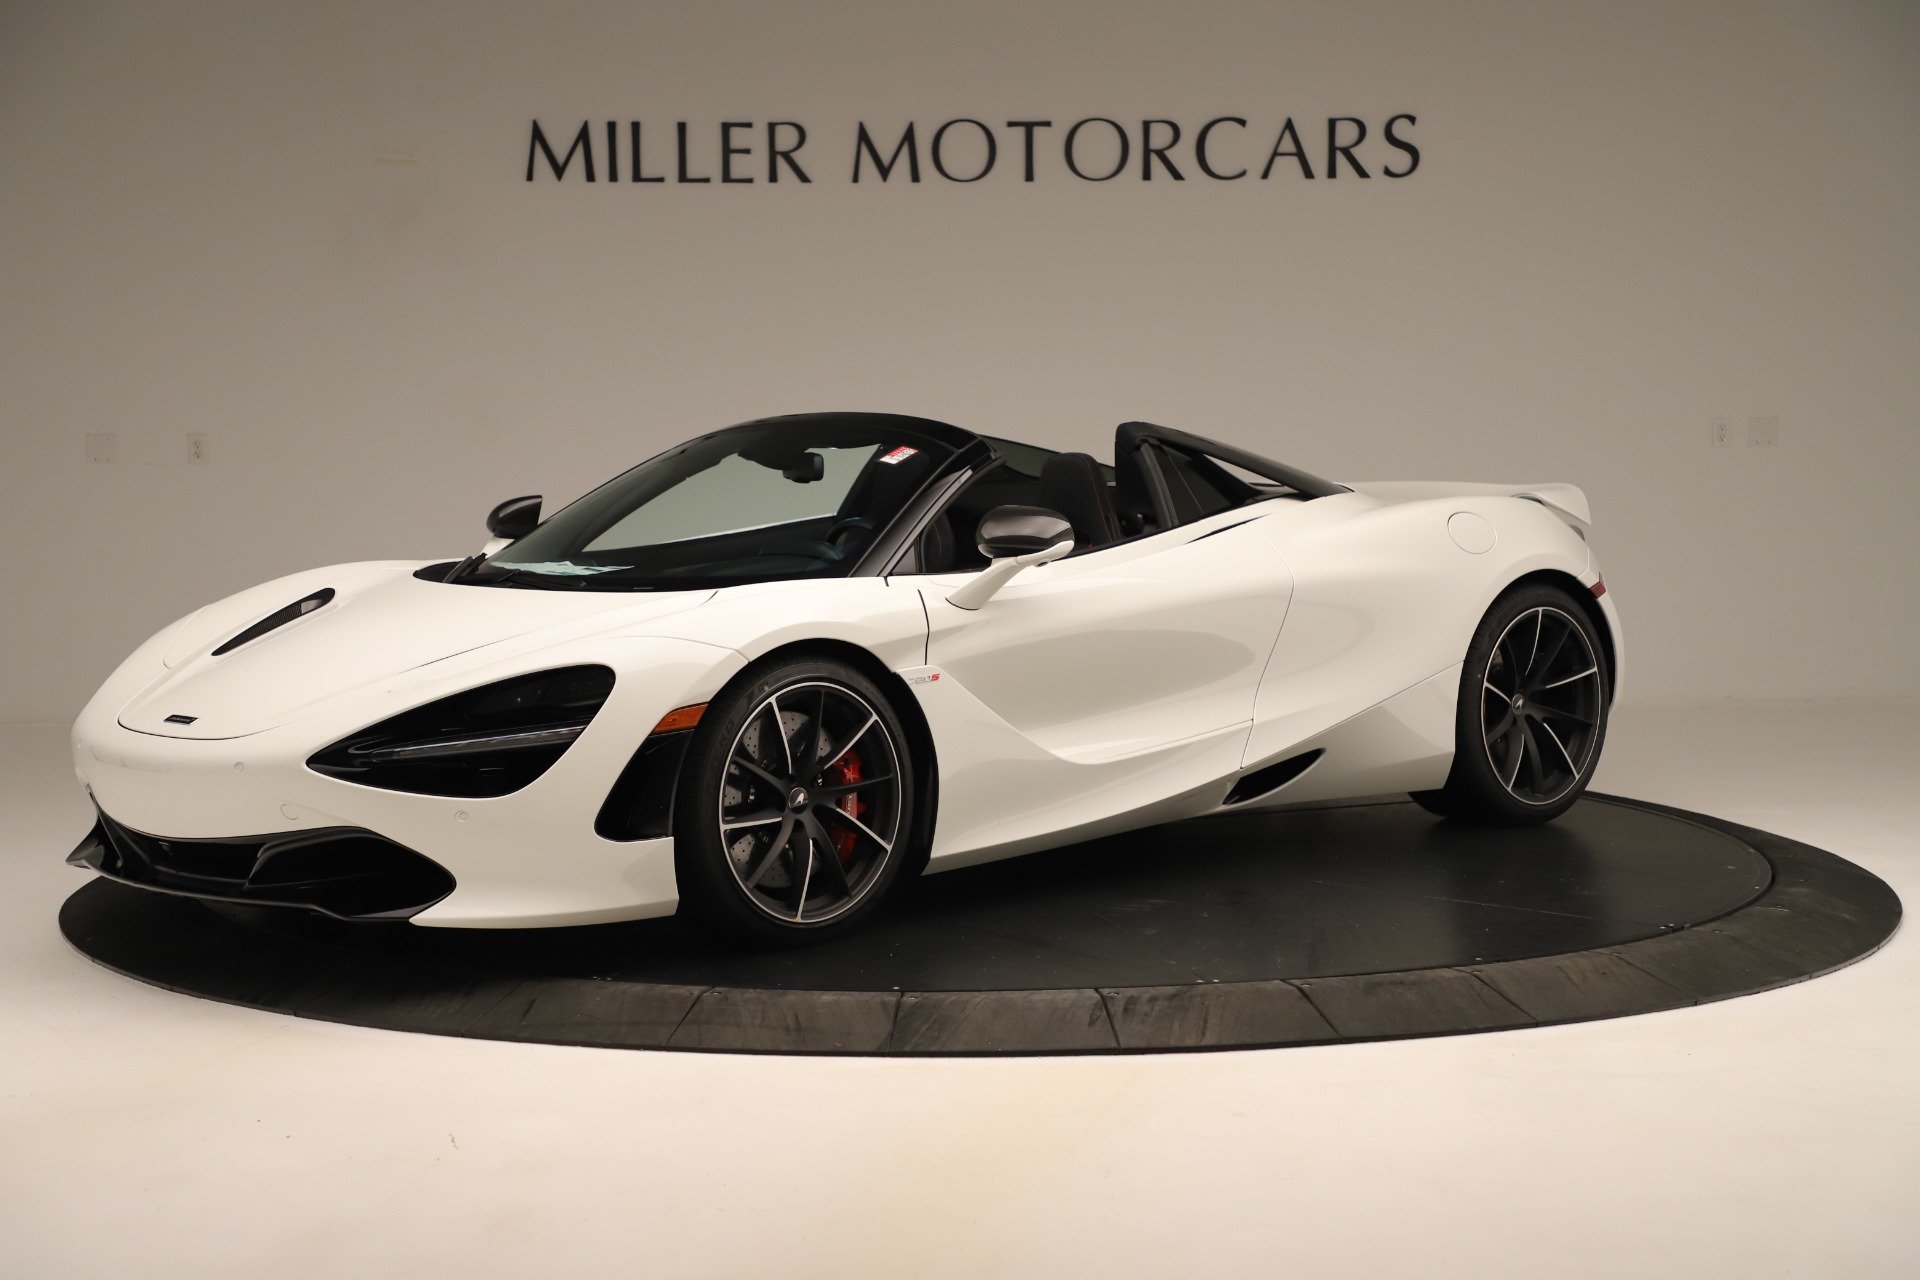 New 2020 McLaren 720S SPIDER Convertible for sale Sold at Alfa Romeo of Greenwich in Greenwich CT 06830 1